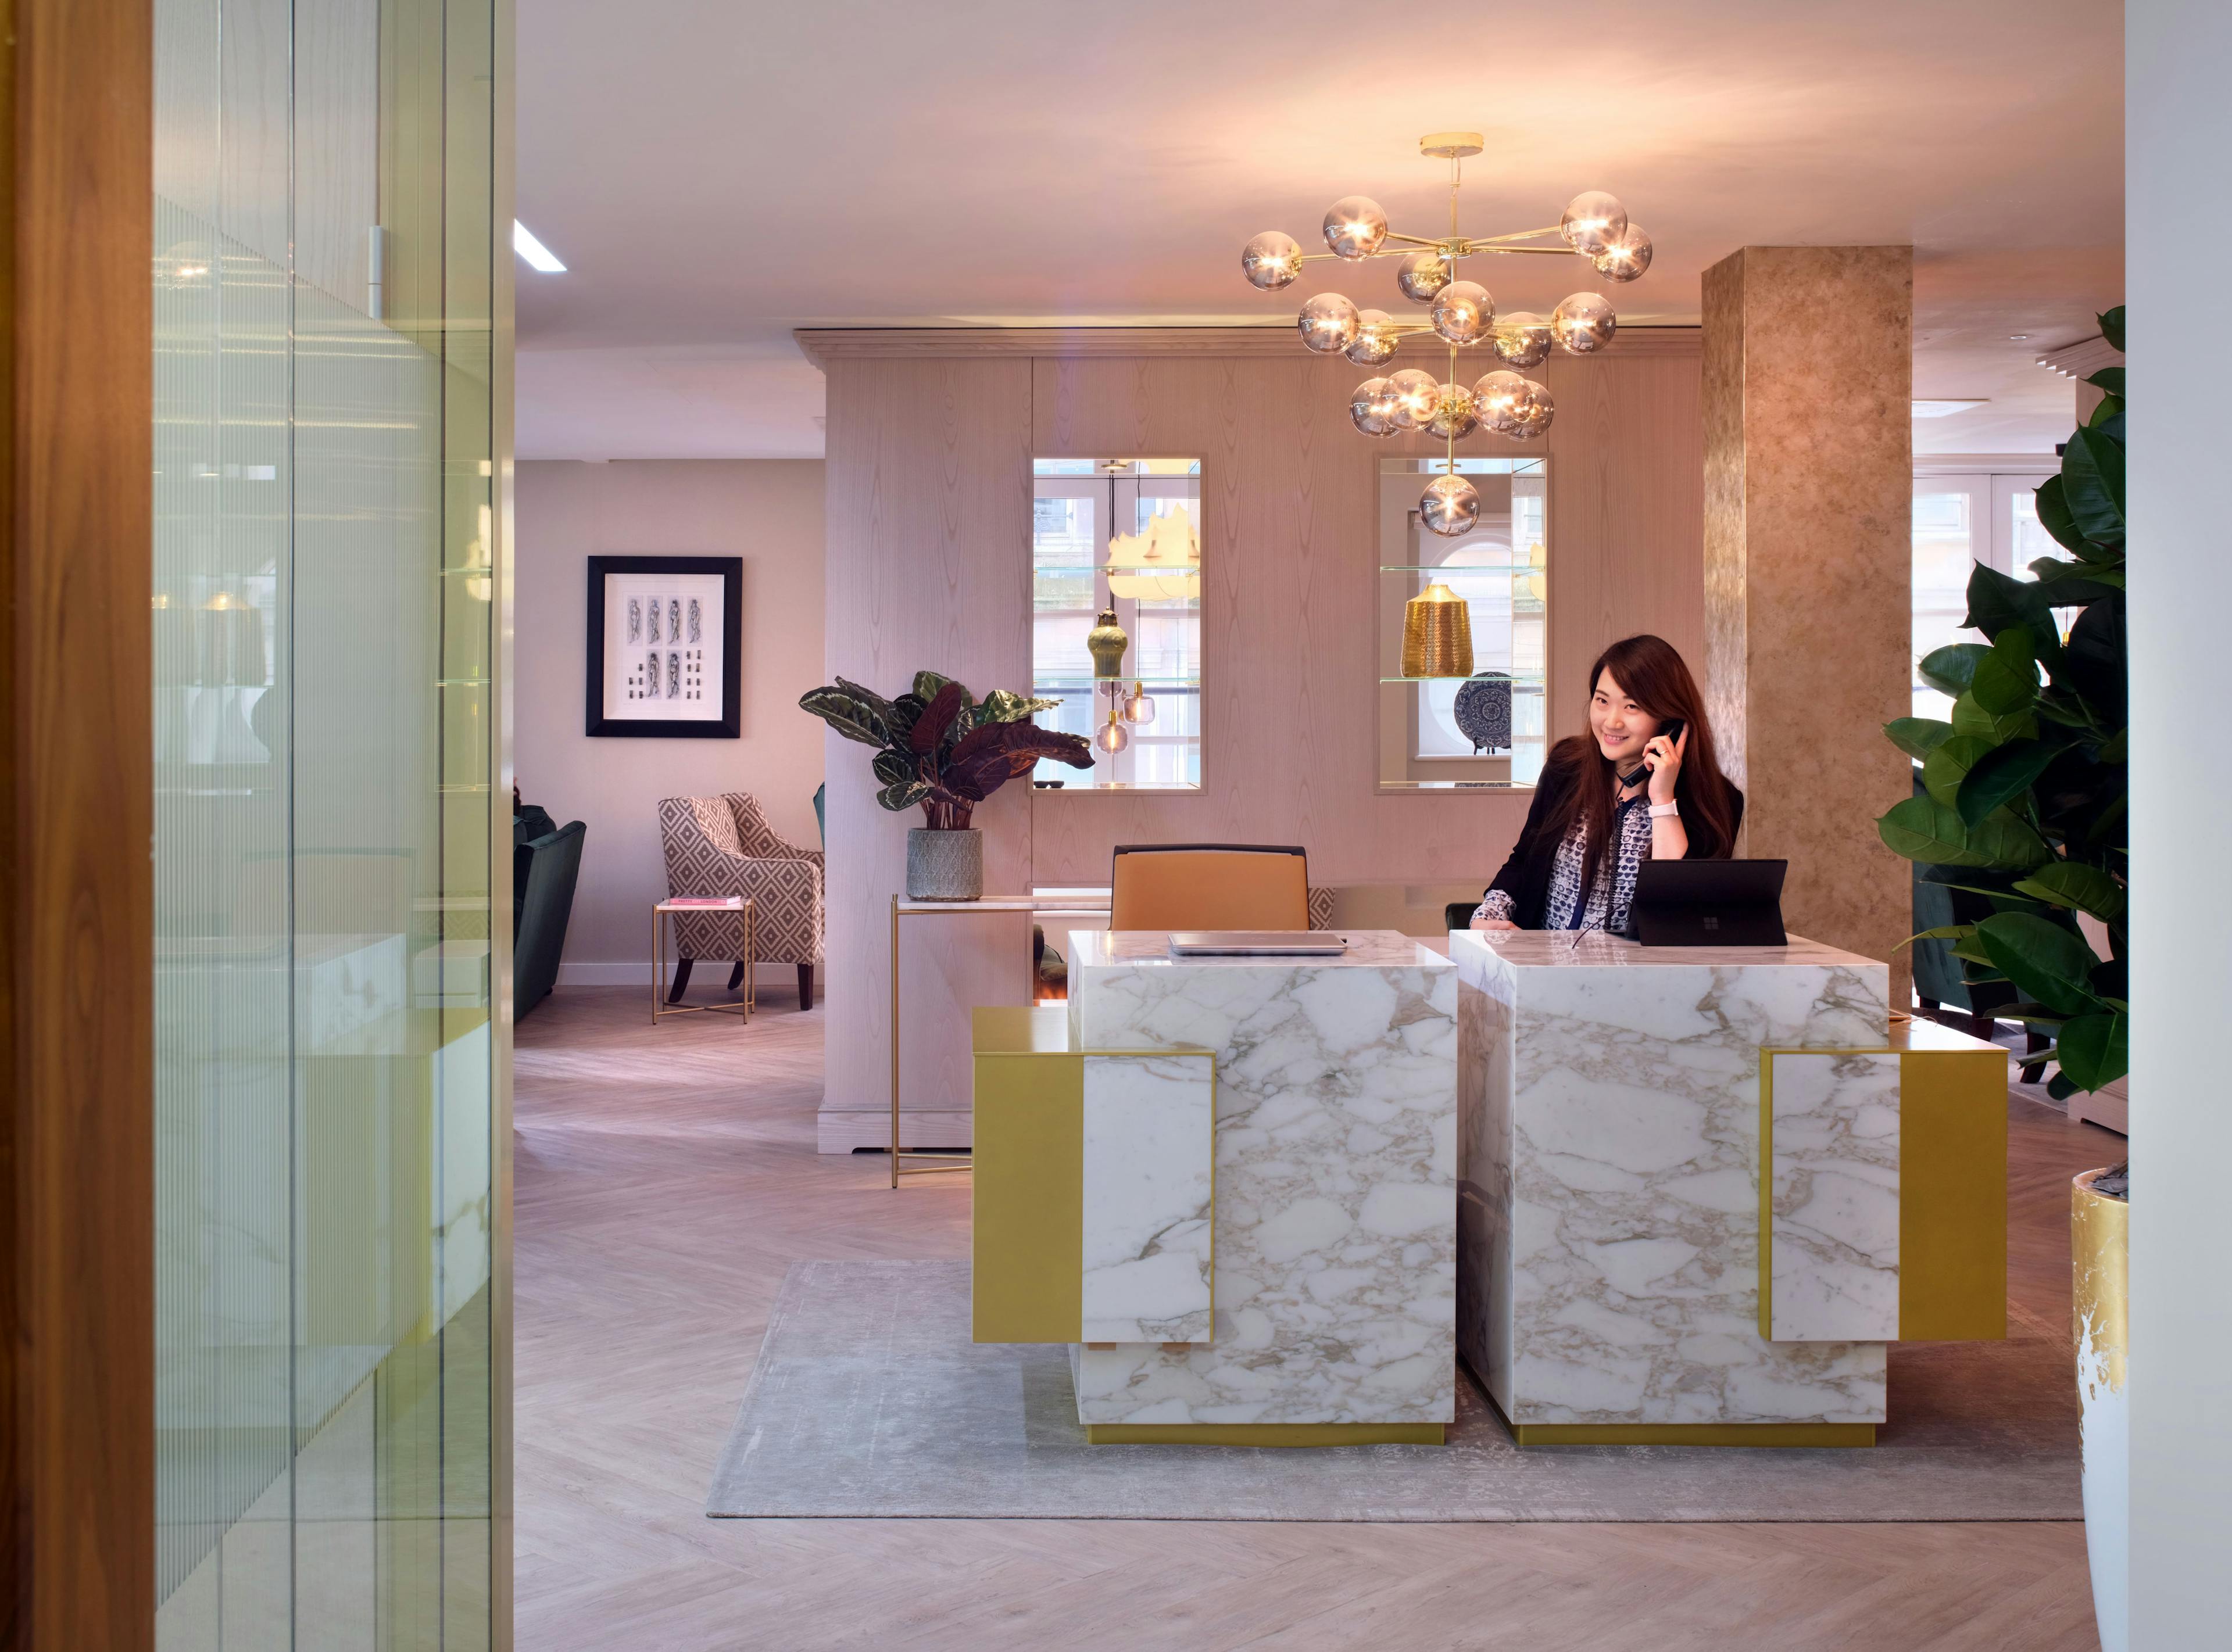 Mayfair – 58 Person Office - Hanover Square